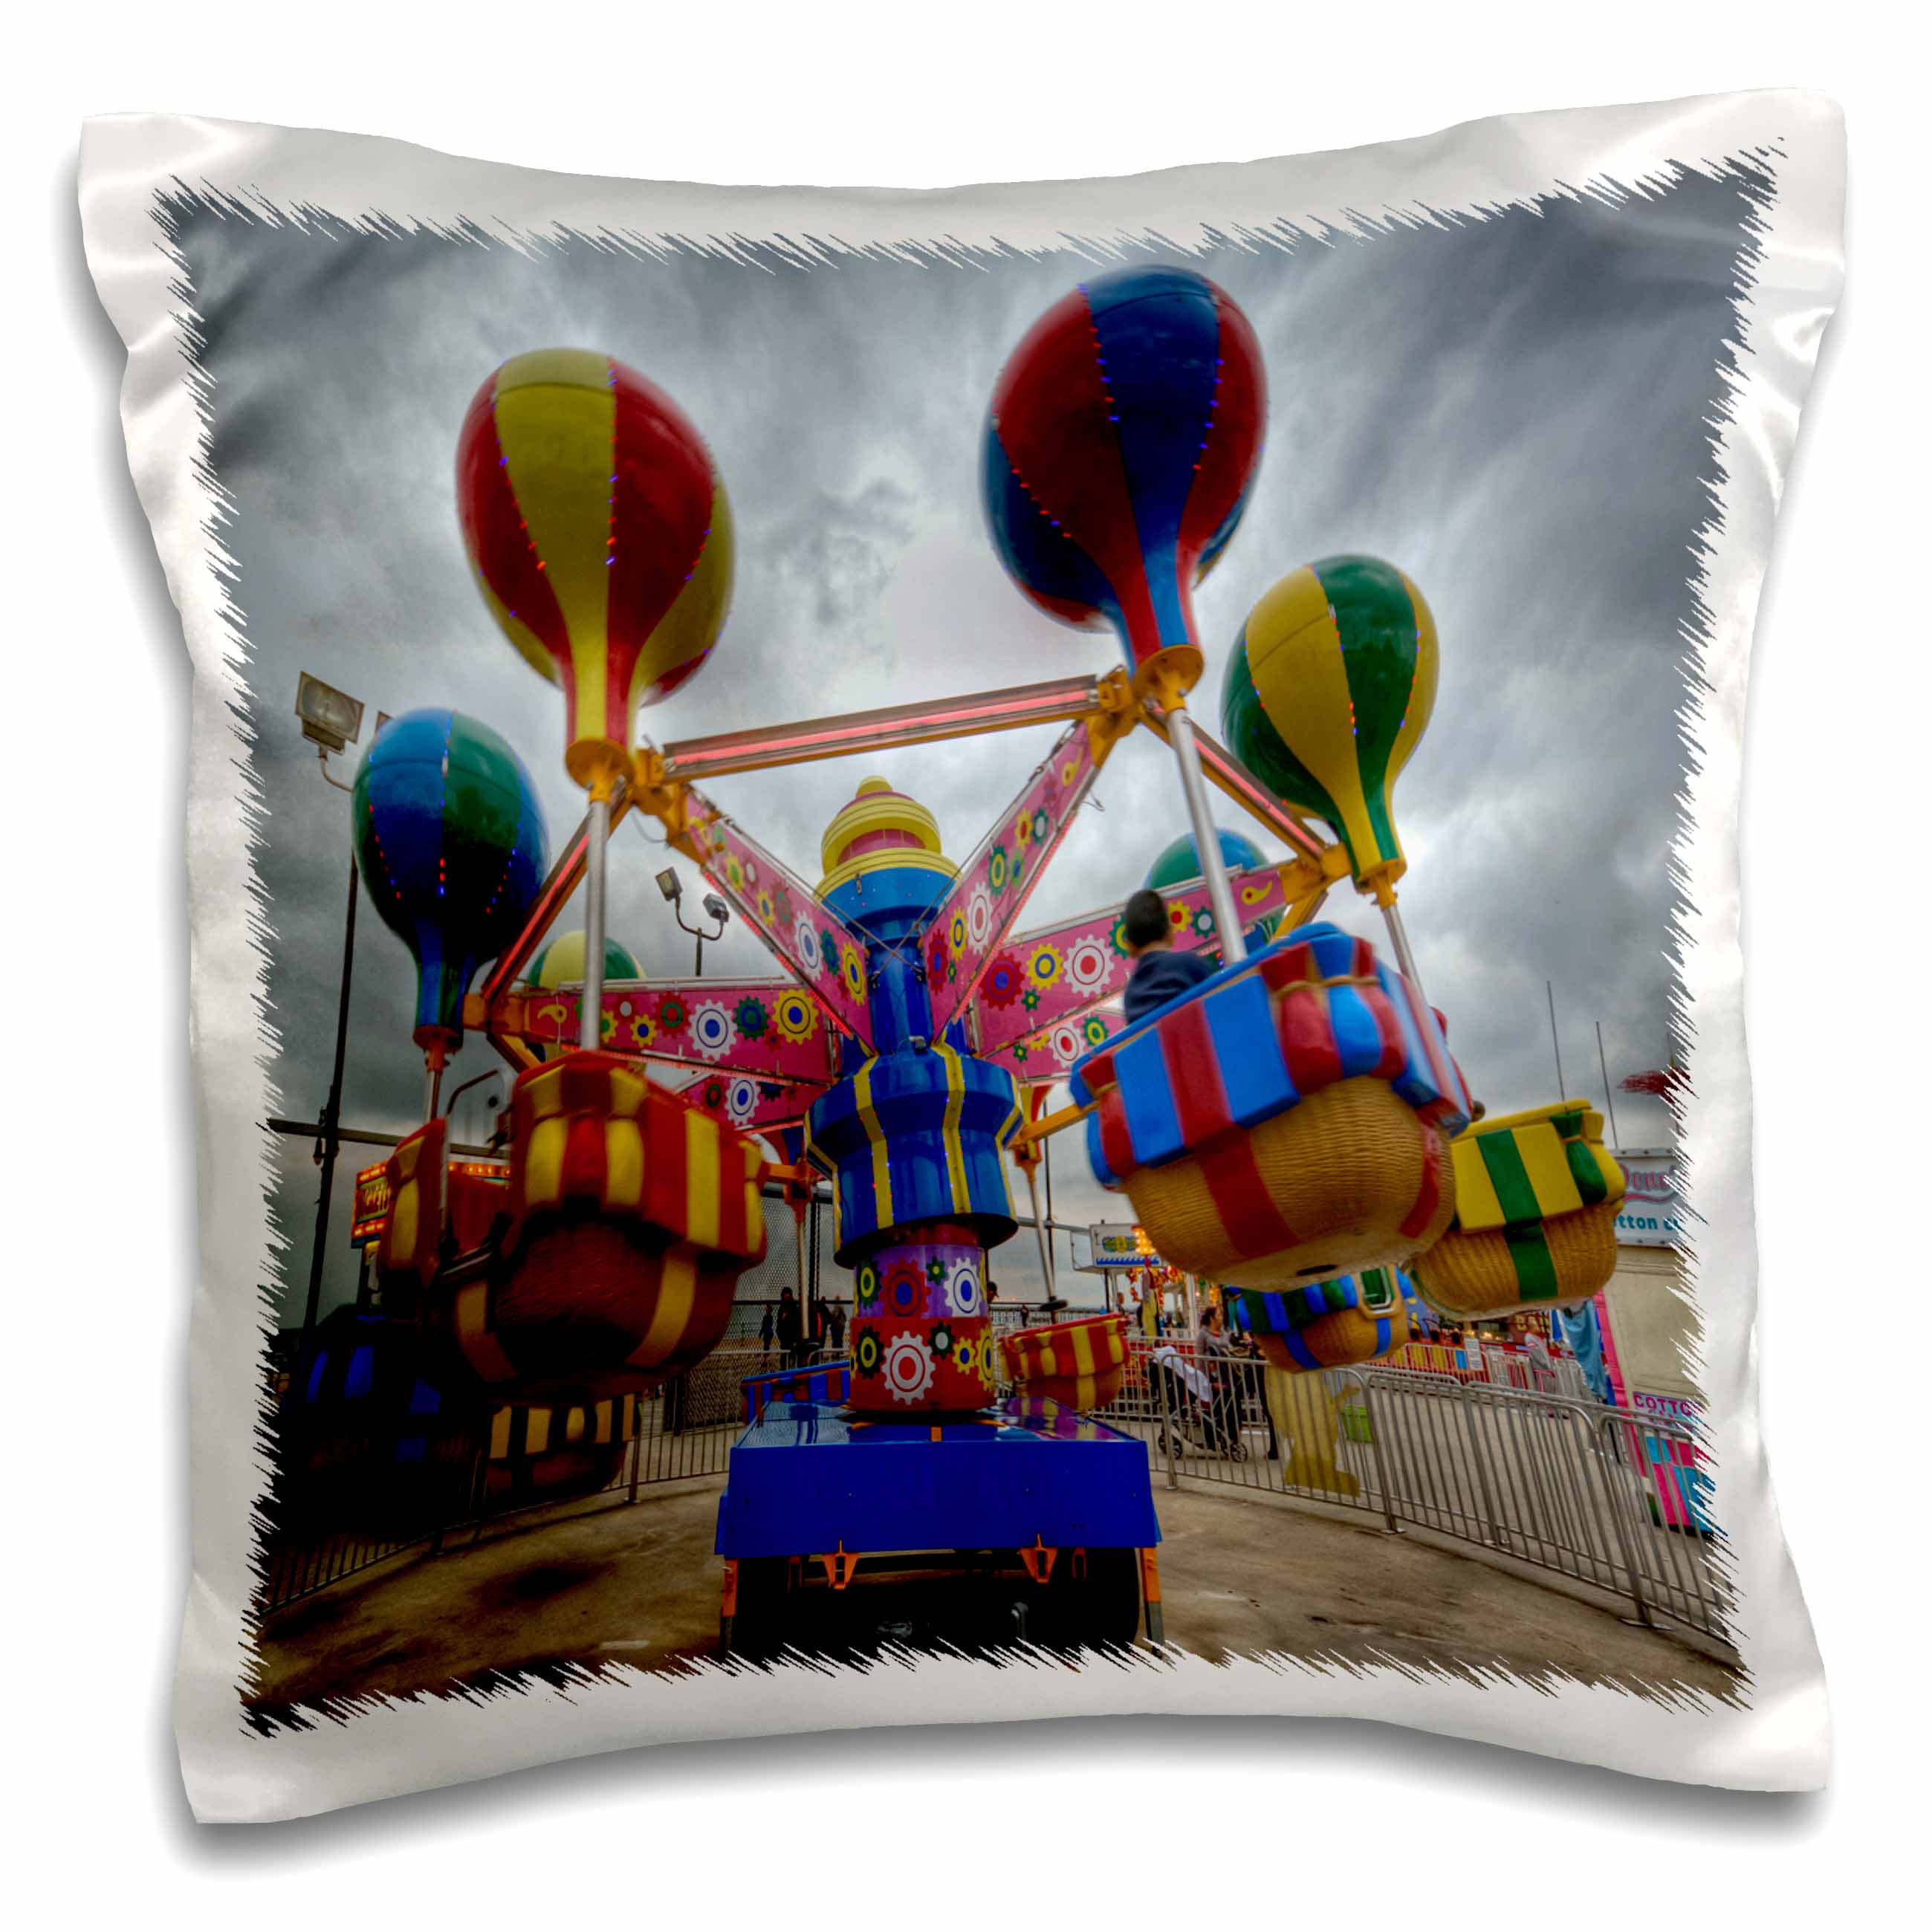 16 by 16-inch pc_7451_1 3dRose Carnival Ride Pillow Case 